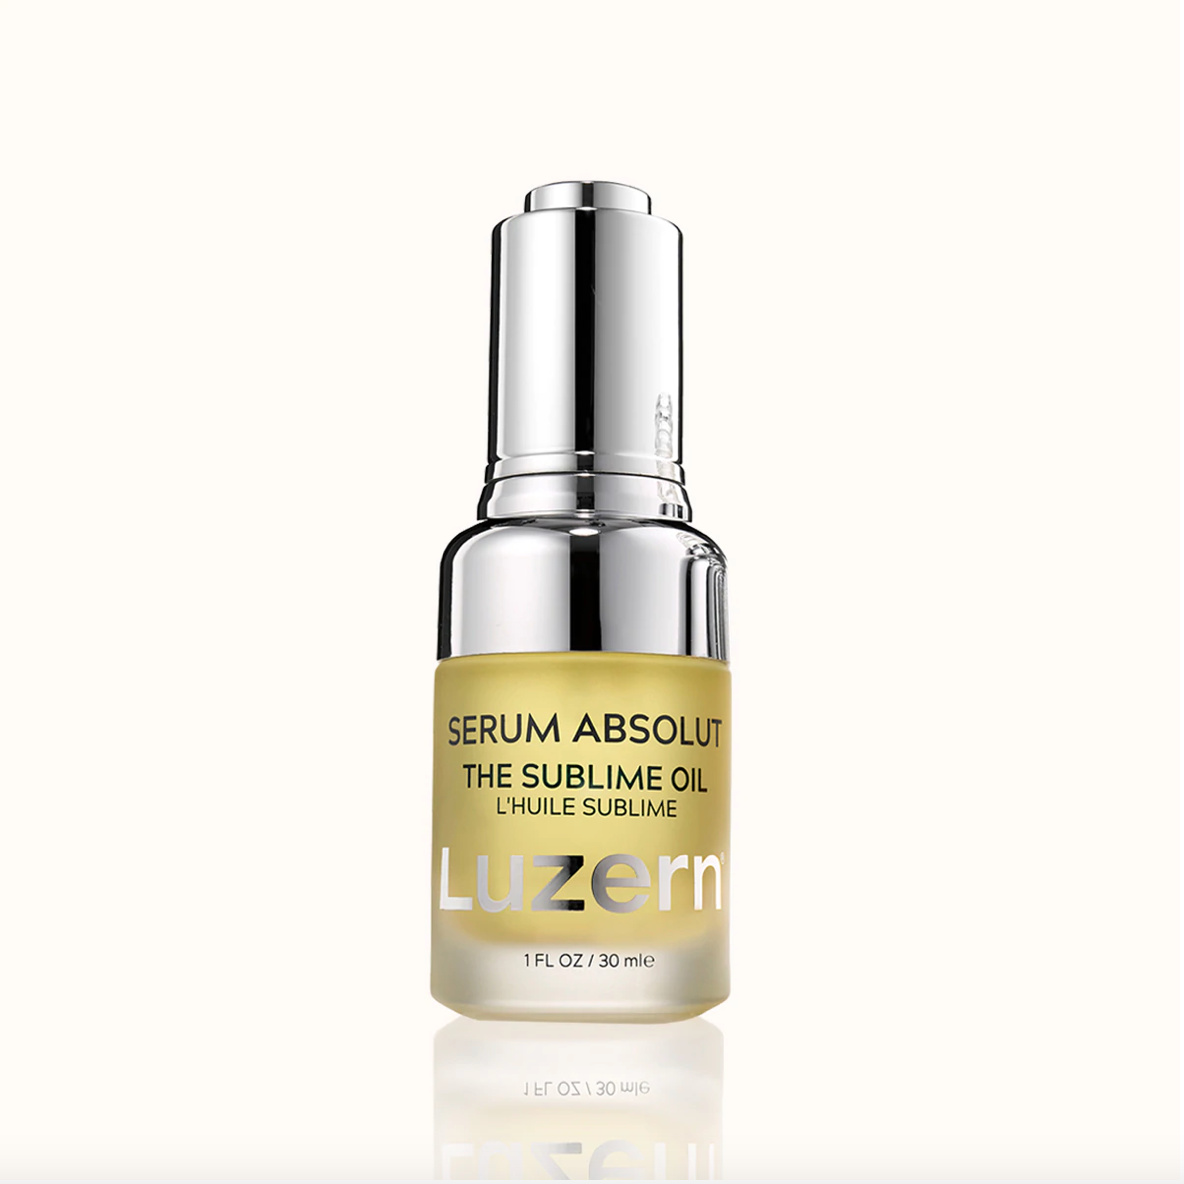 Serum Absolute Sublime Oil